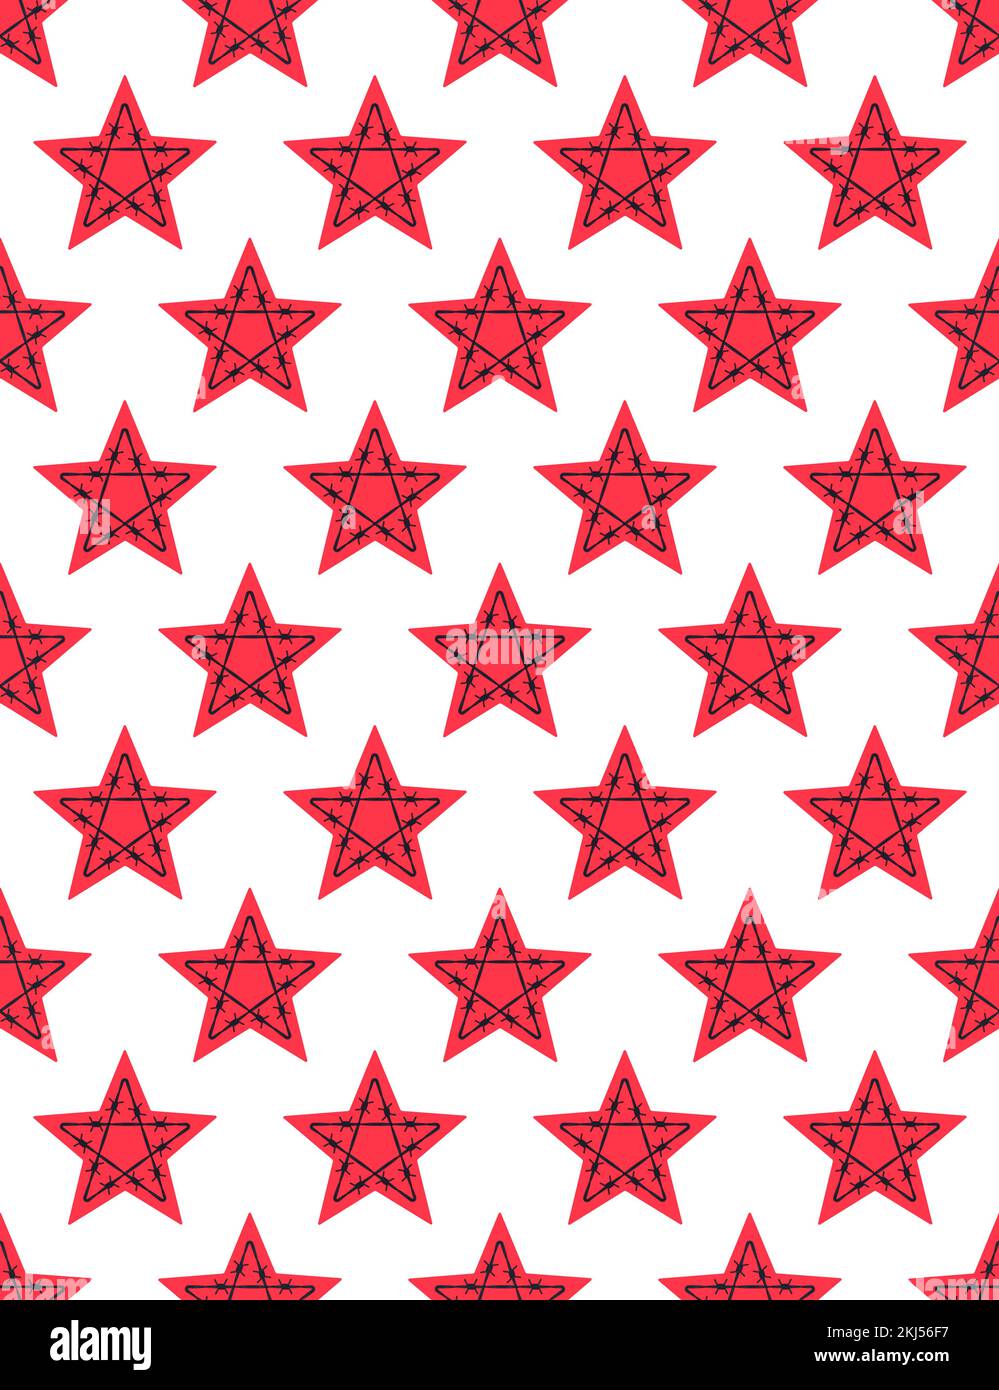 Seamless pattern of an abstract barbed wire red five-pointed star Stock Vector